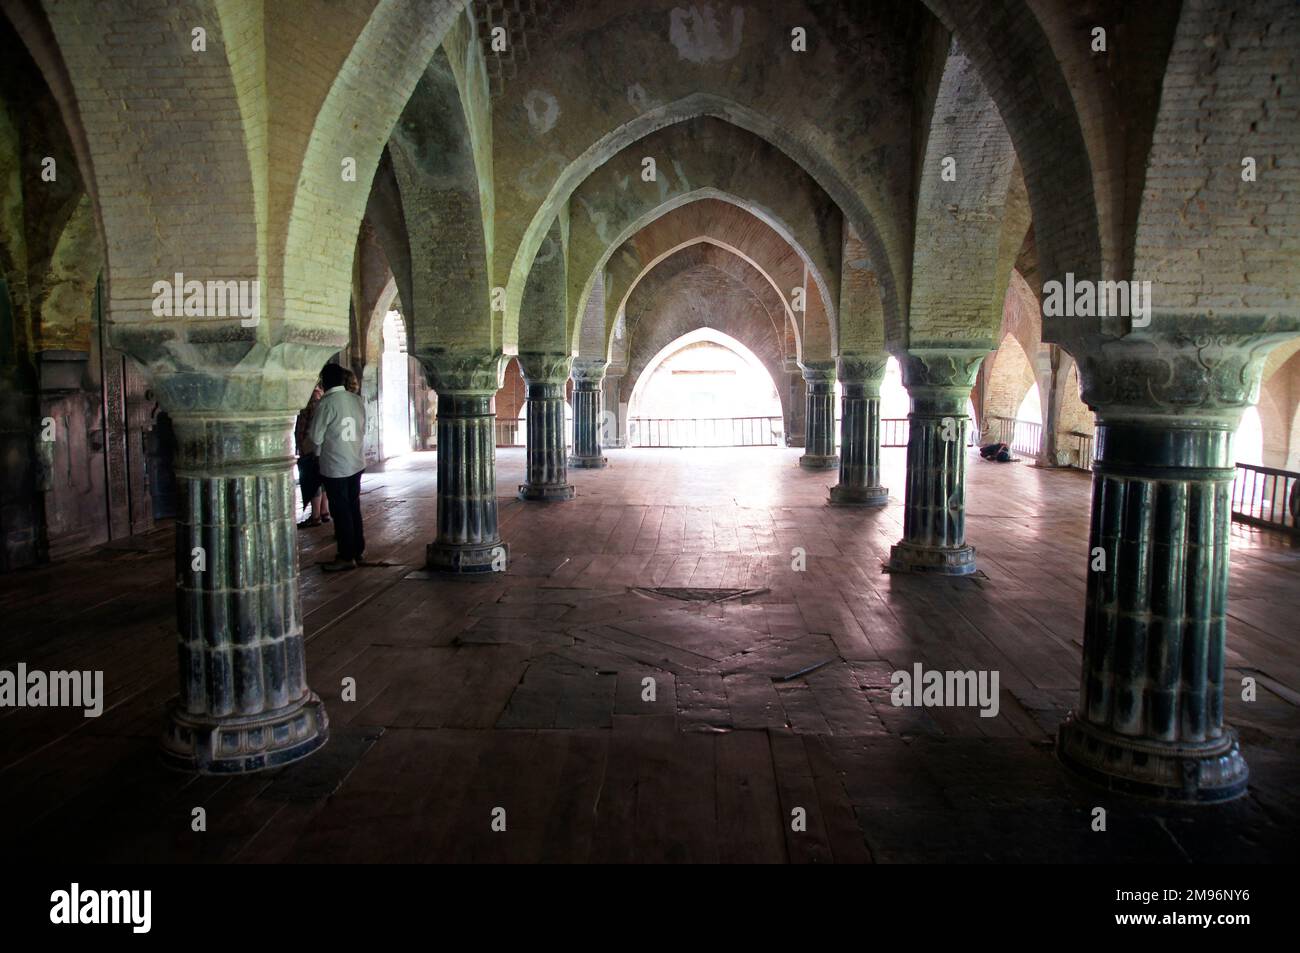 India, West Bengal, Pandua: Adina Mosque or Jami Masjid (1364 AD), innerior, arched nave. Stock Photo